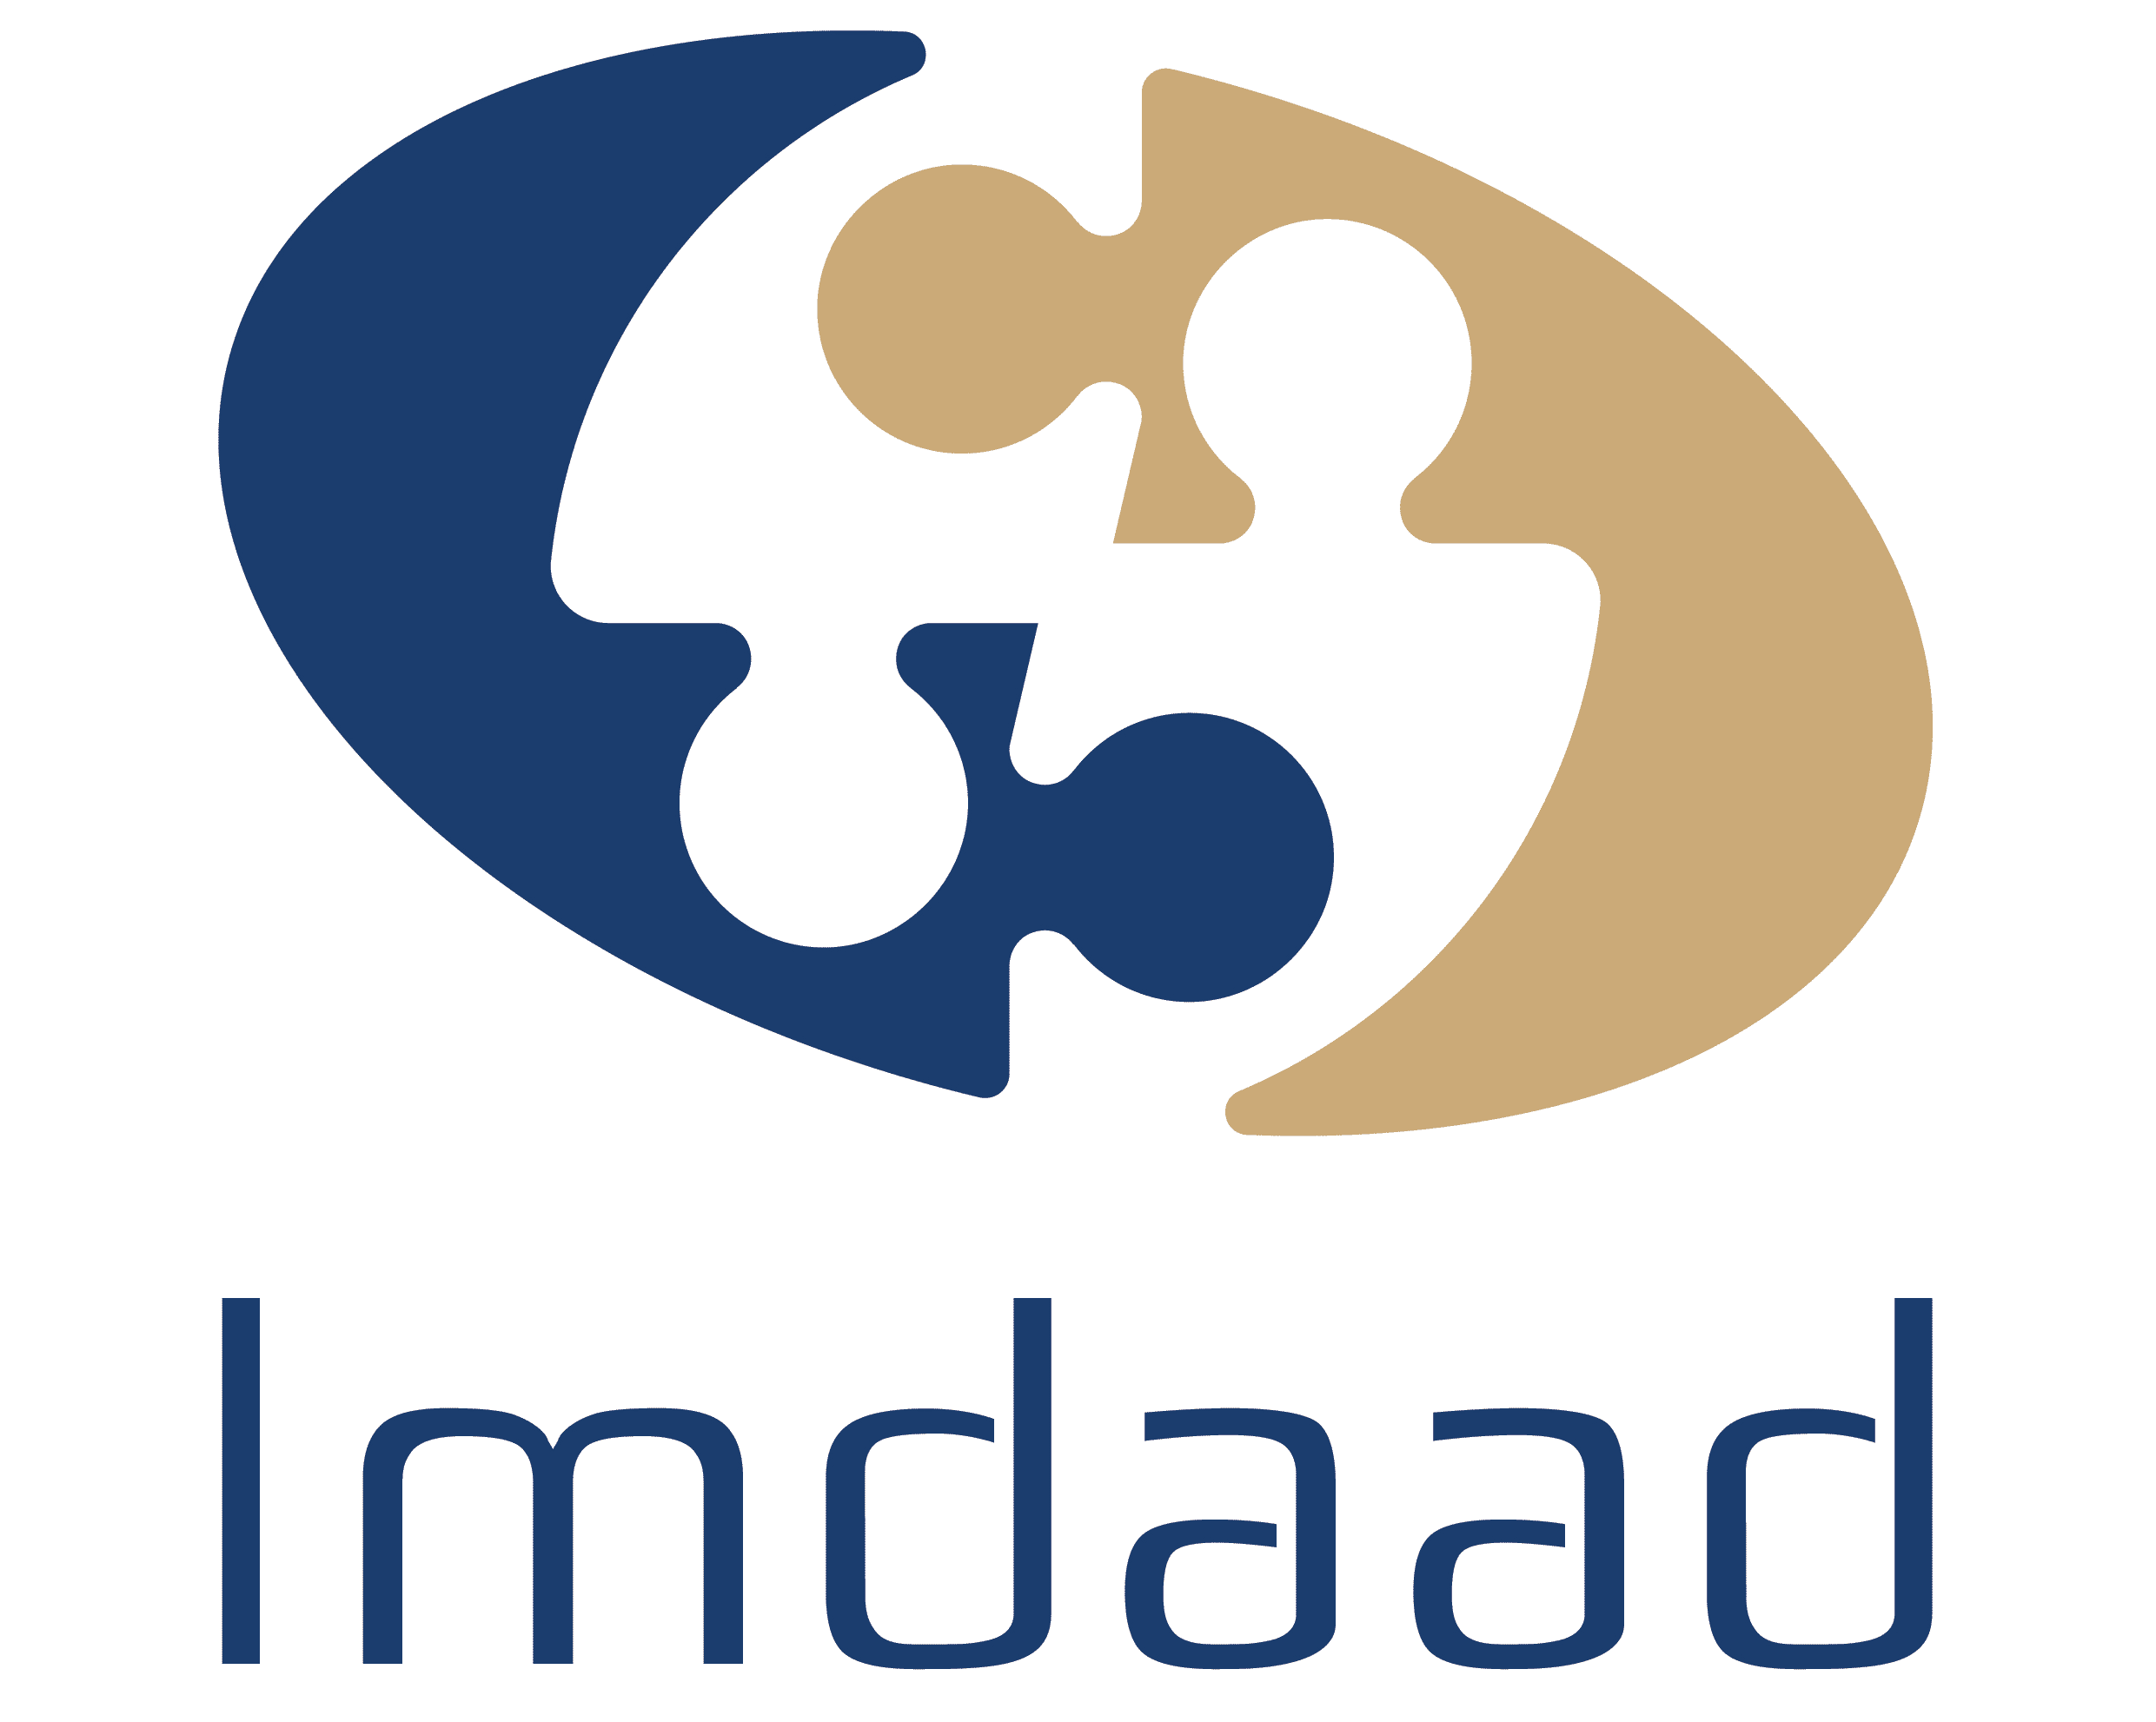 Image for Imdaad Honoured At Global FM Awards Of Excellence In Facilities Management 2020